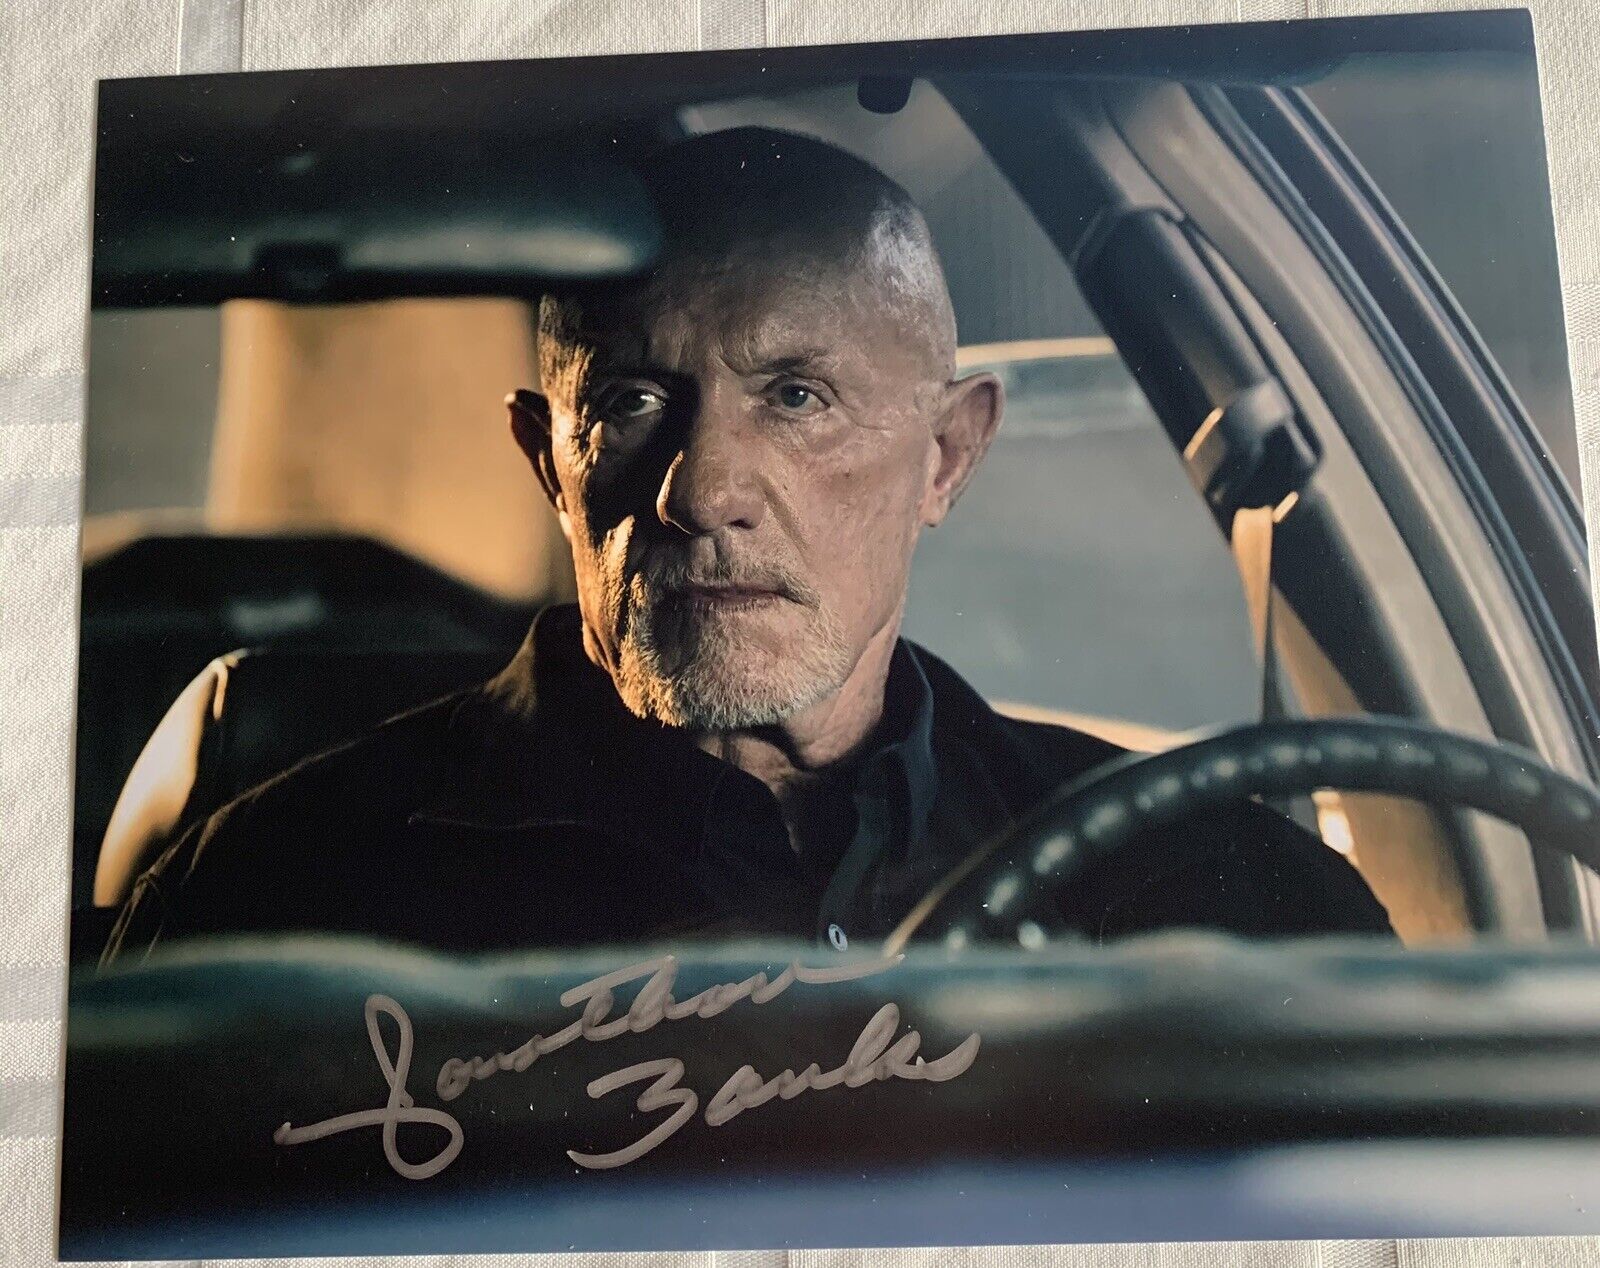 jonathan banks signed 8x10 Photo Poster painting Pic Better Call Saul Breaking Bad Auto